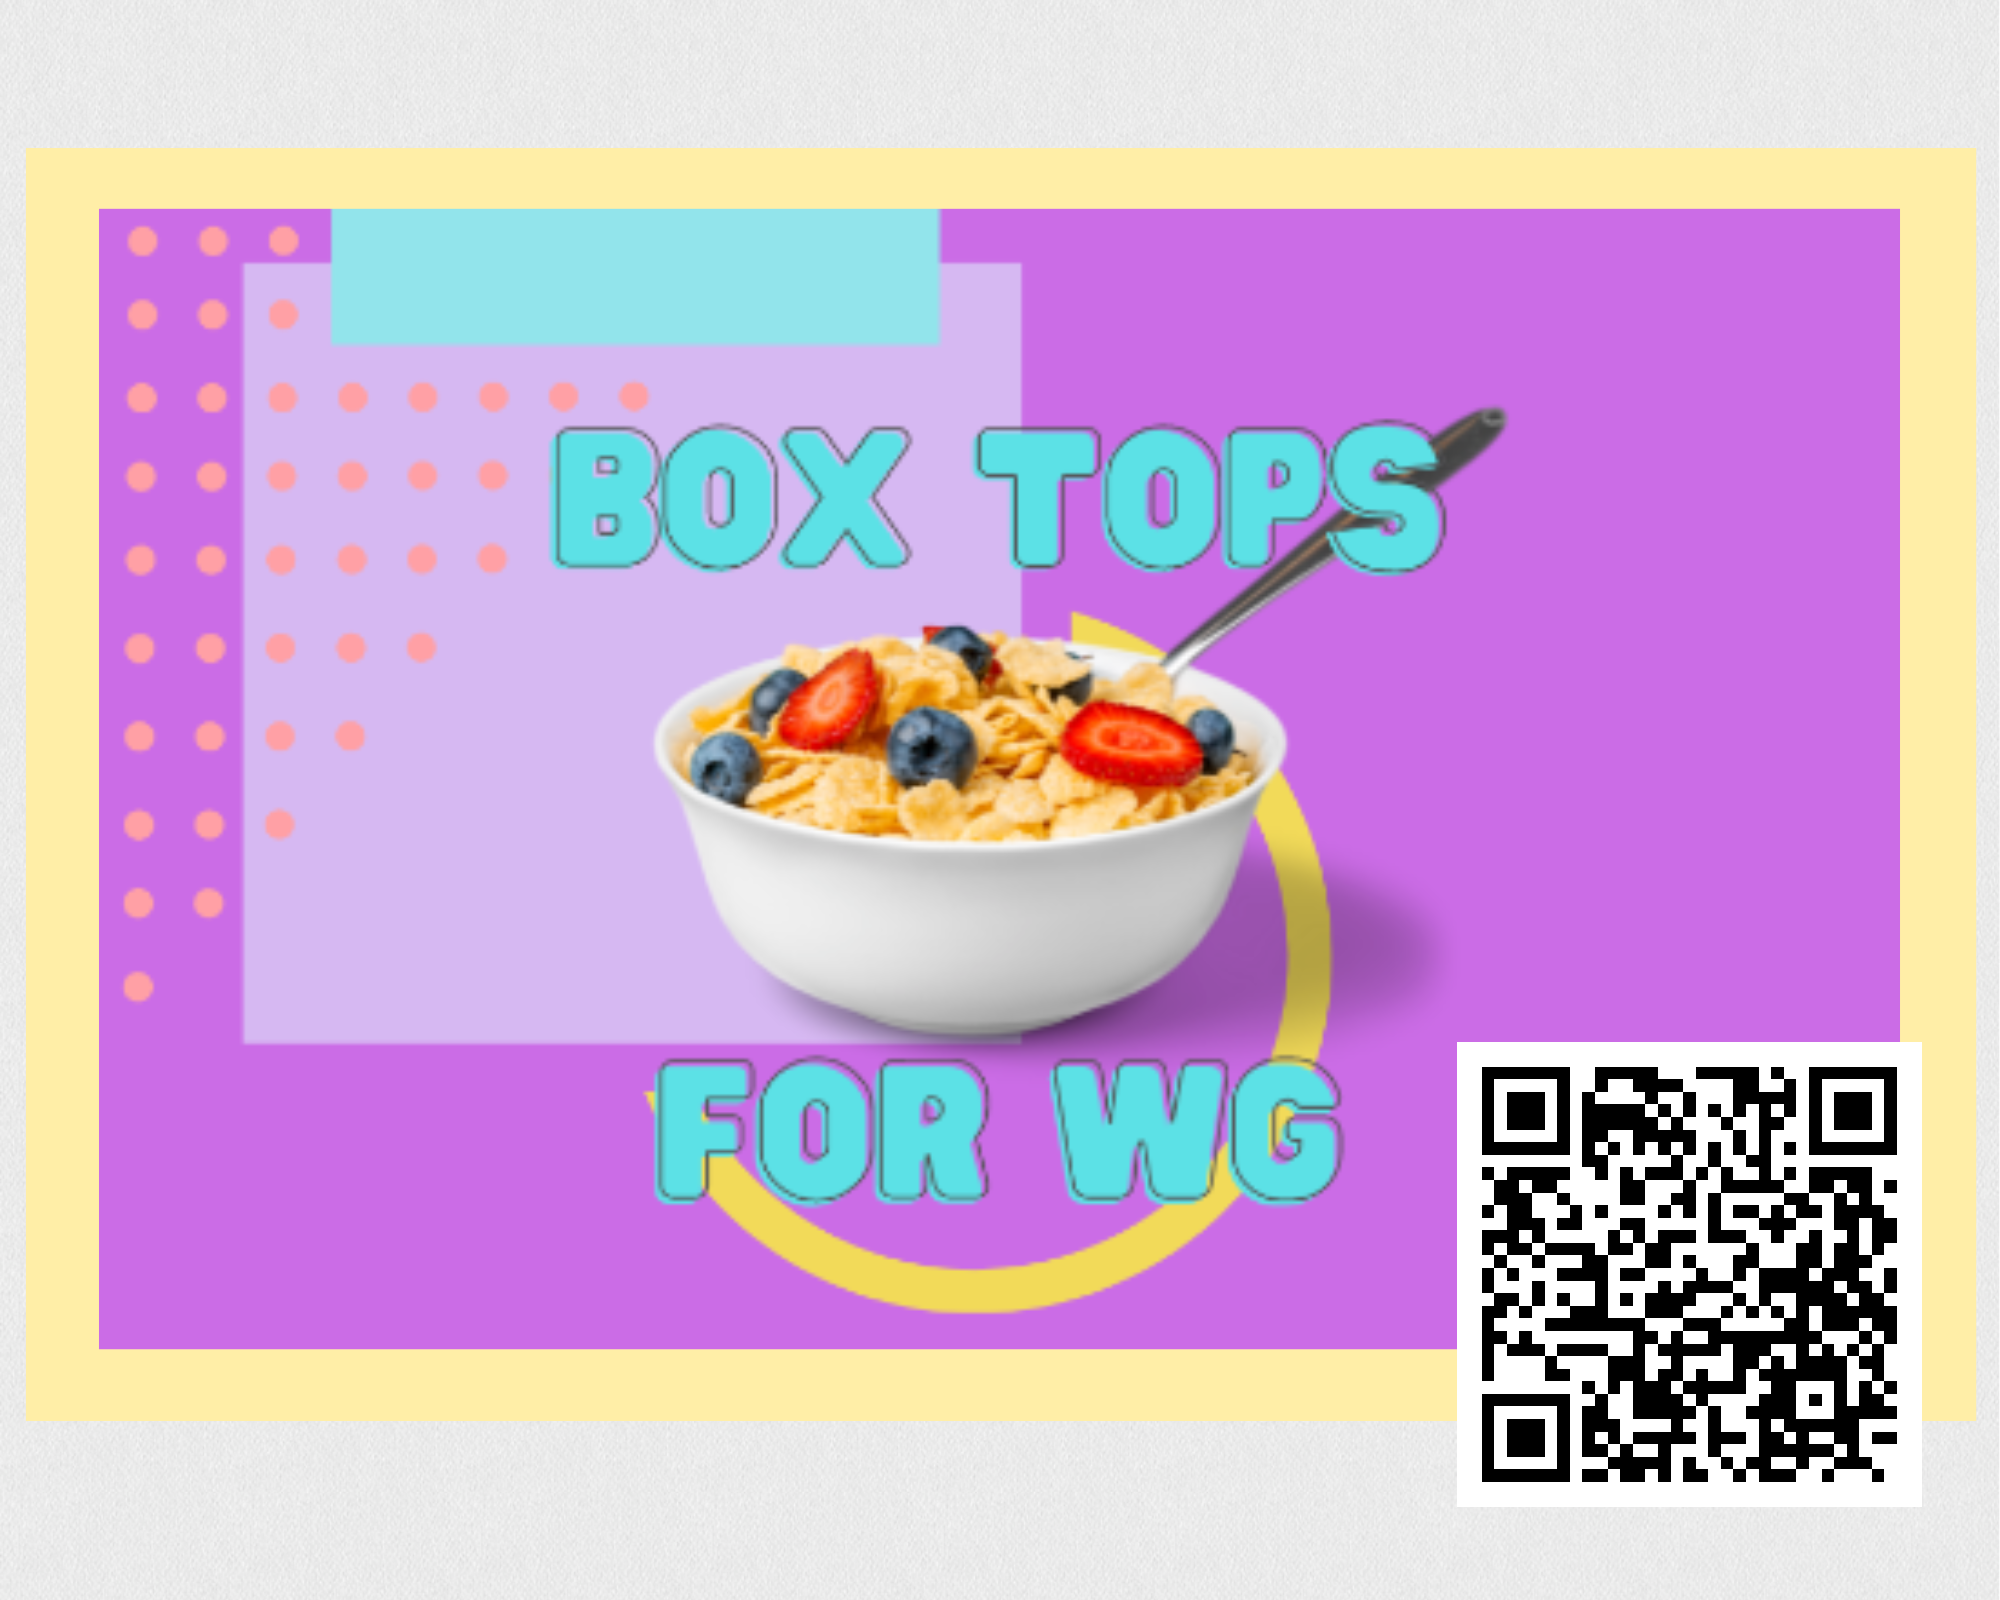 Willow Grove Box Tops 